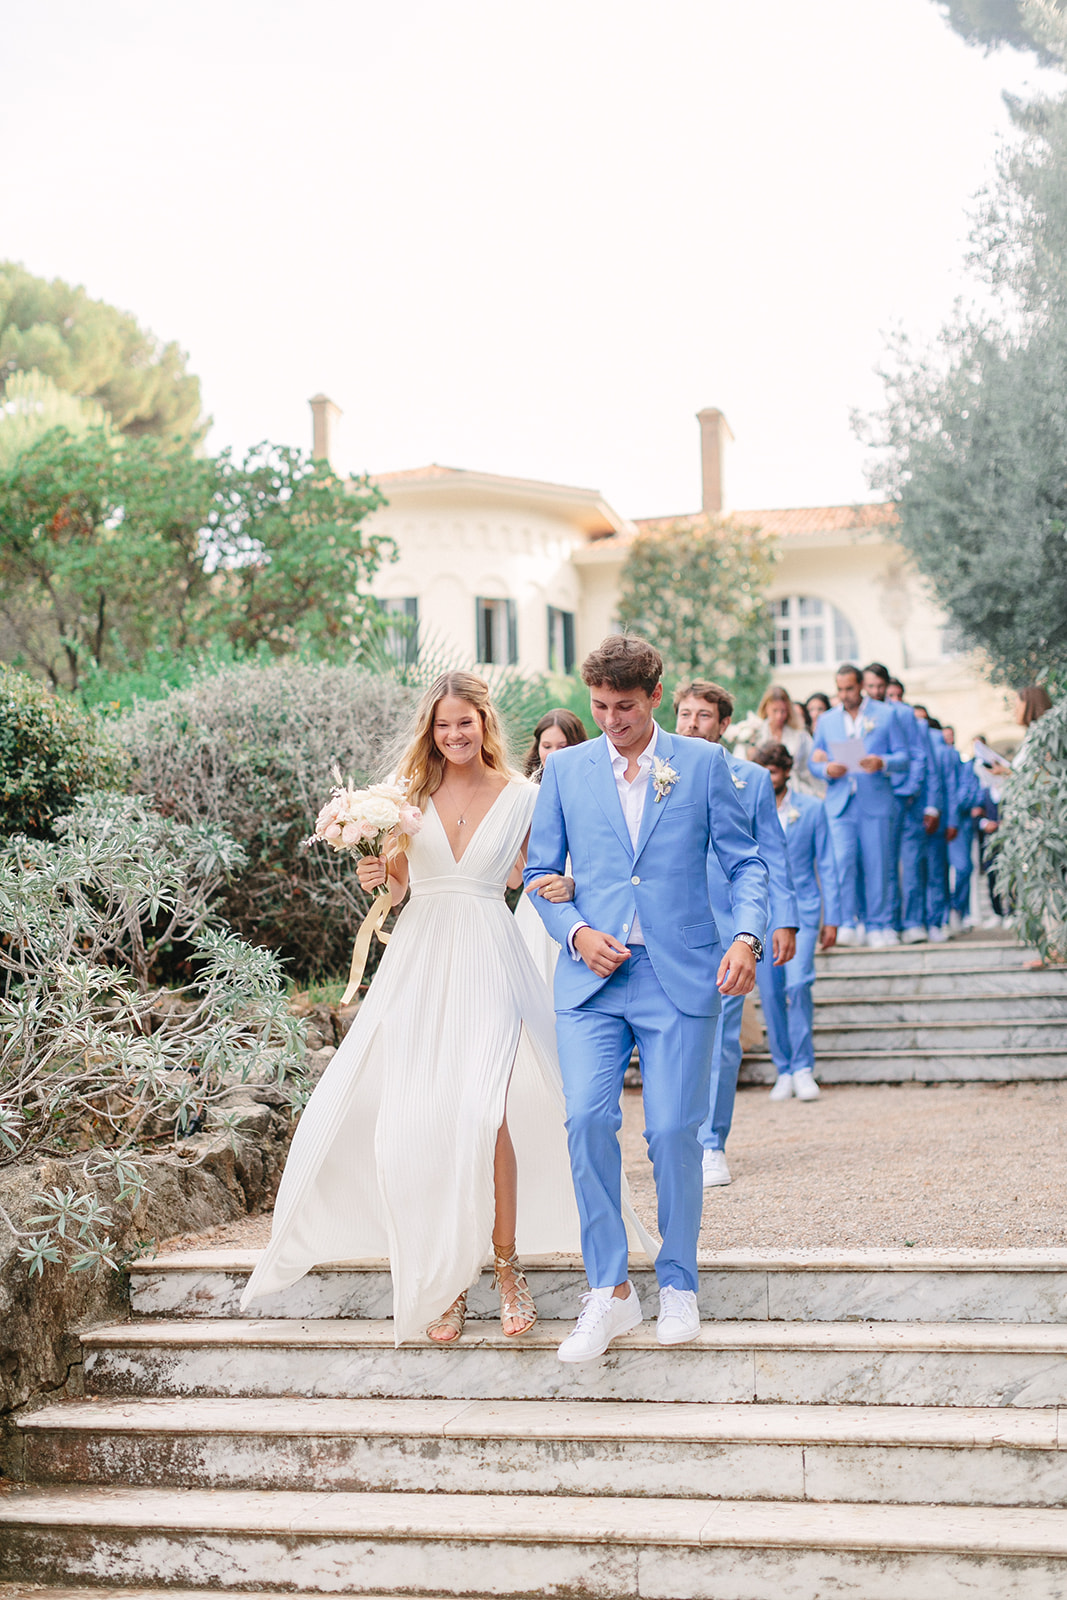 A chic, laid-back wedding in the South of France | Antibes Real Weddings